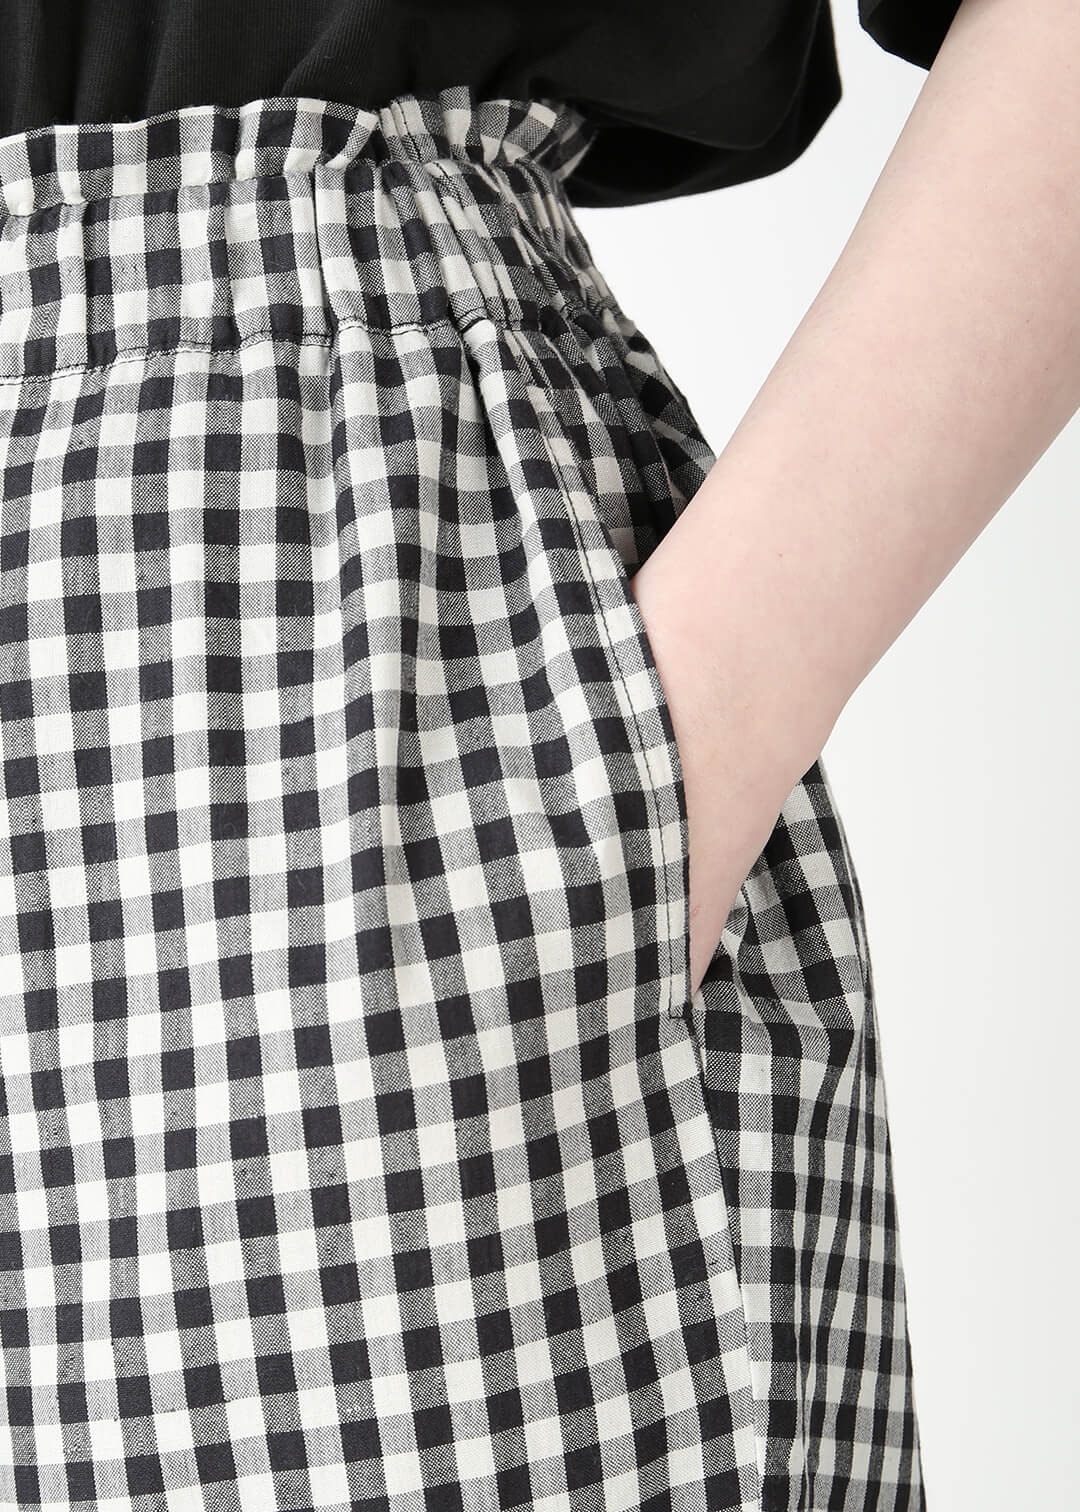 Kaname Relax Pants Gingham